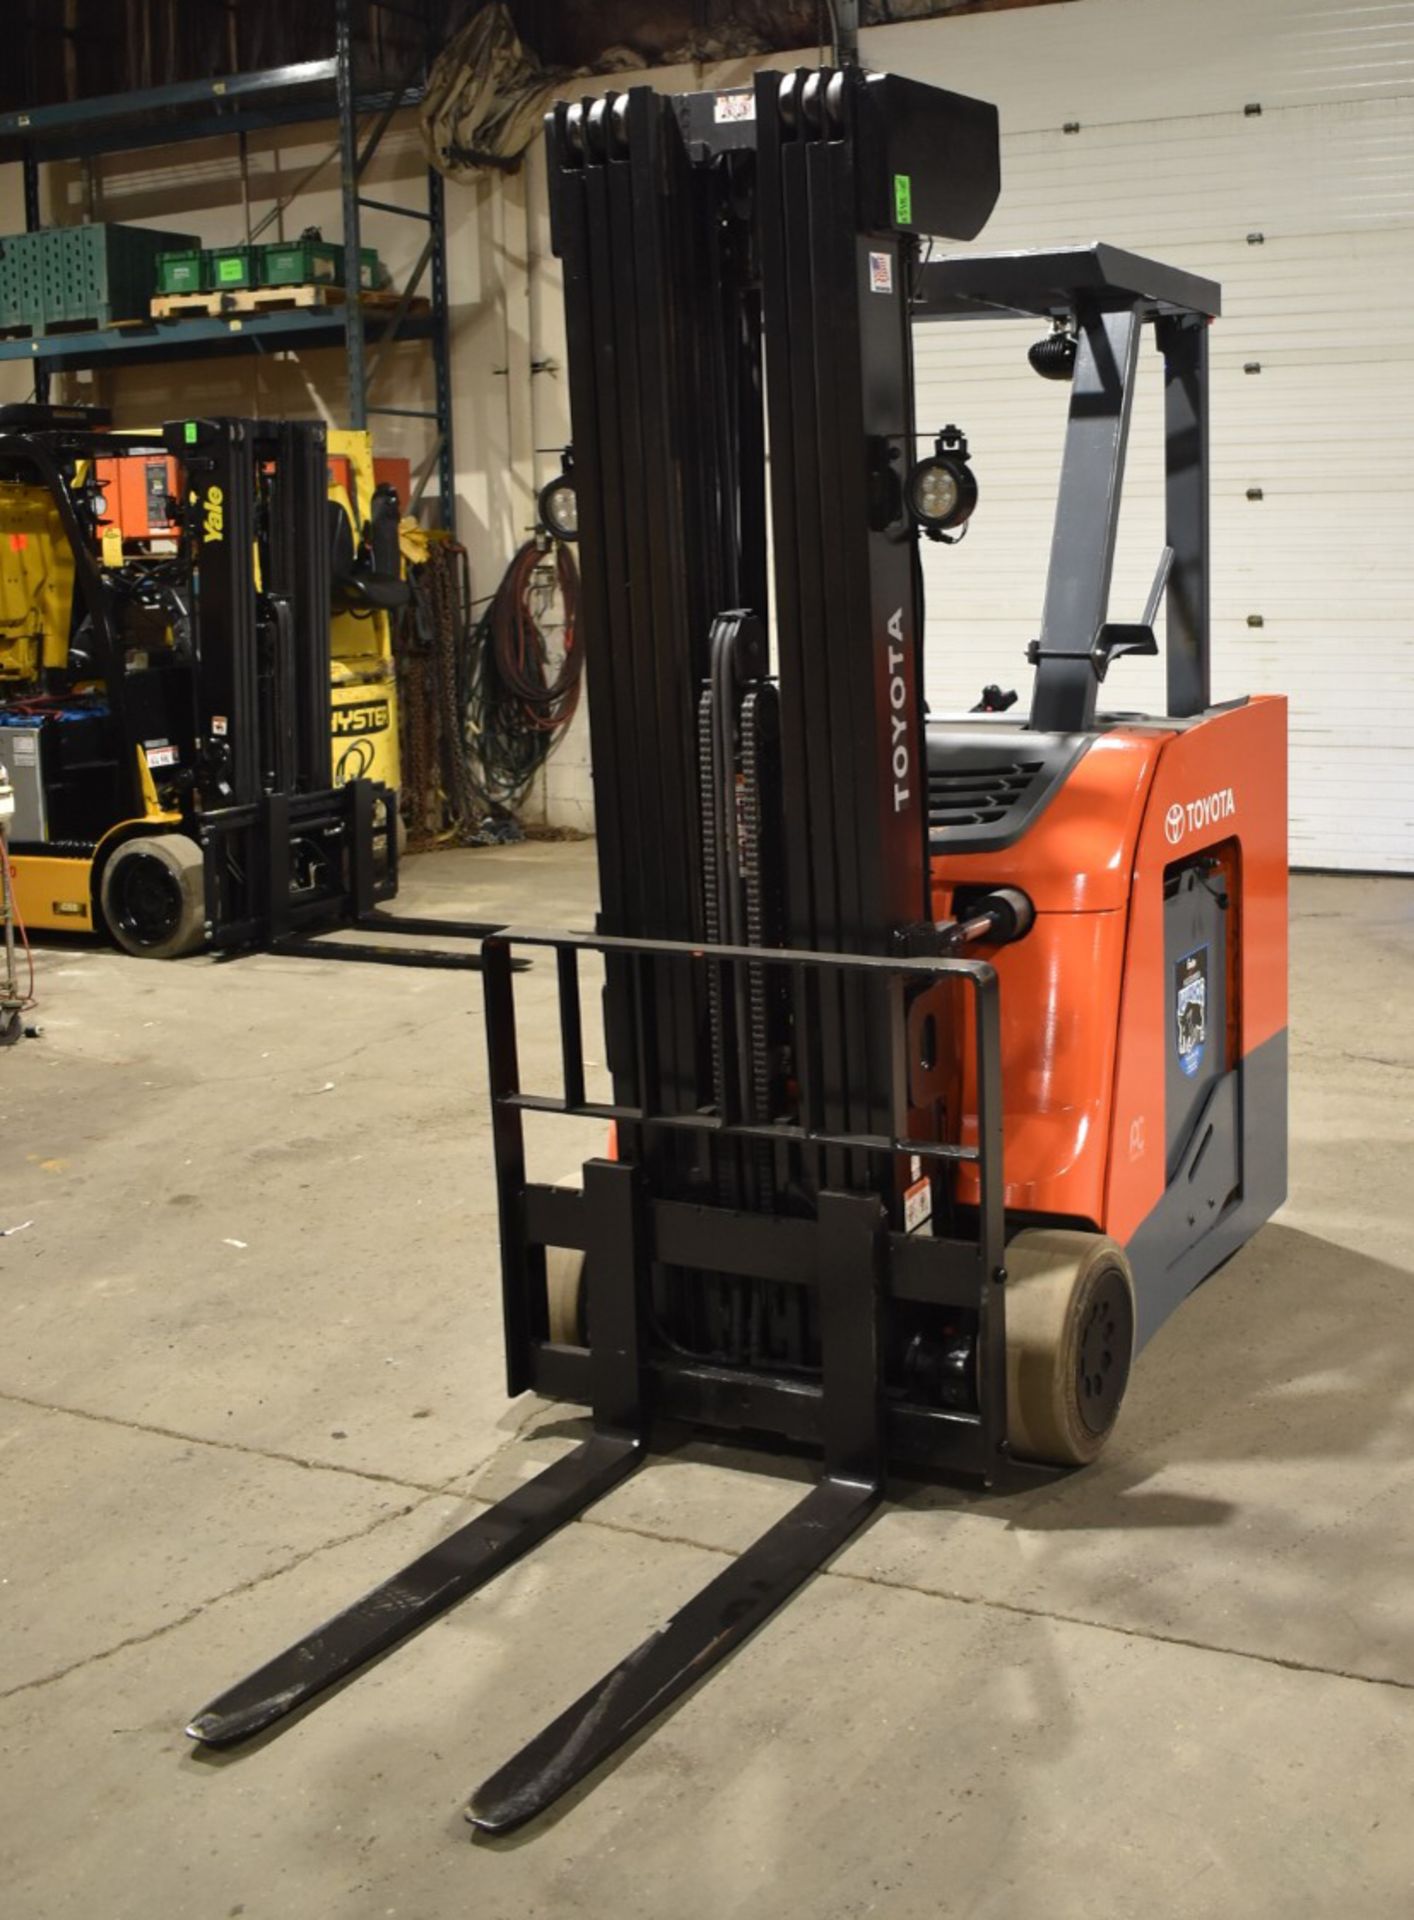 TOYOTA (2017) 8BNCU20 STAND ON ELECTRIC FORKLIFT WITH, 4,000LBS CAPACITY, 36V BATTERY, 276.5" MAX - Image 2 of 6